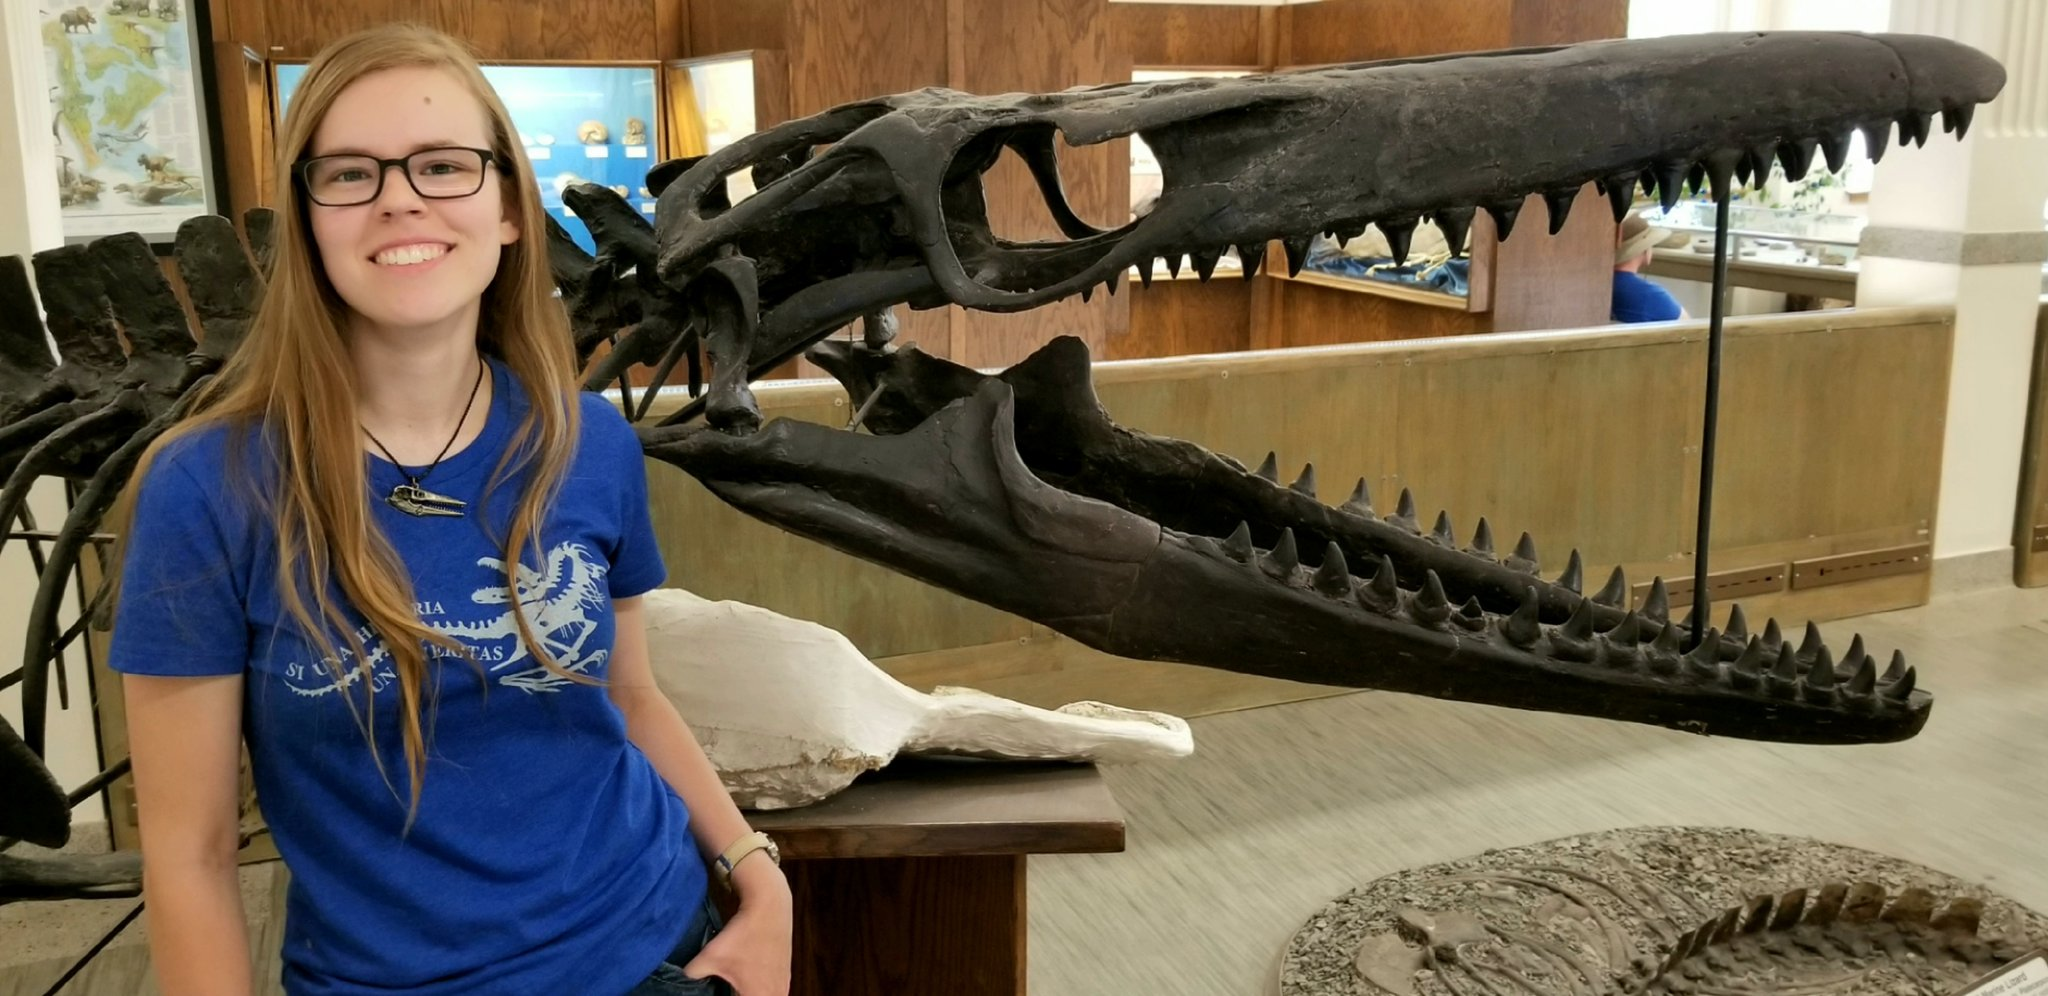 Amelia Zietlow with a cast of Mosasaurus conodon at the South Dakota School of Mines & Technology in Rapid City, SD. (Photo: Brady Holbach)